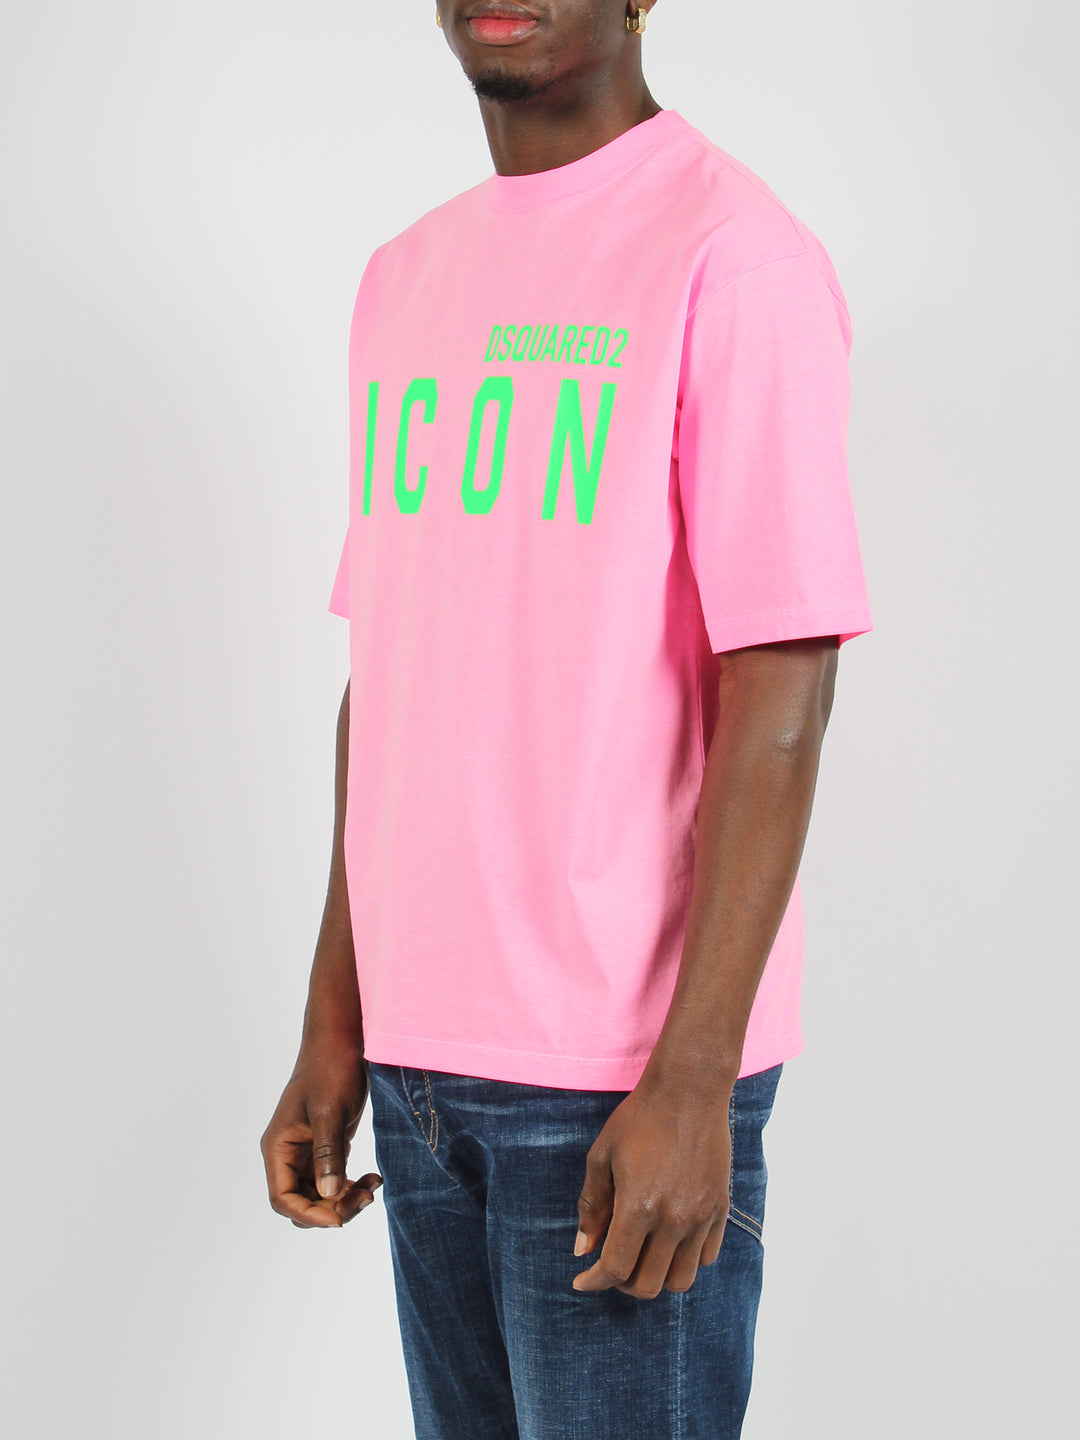 Icon blur loose fit t-shirt